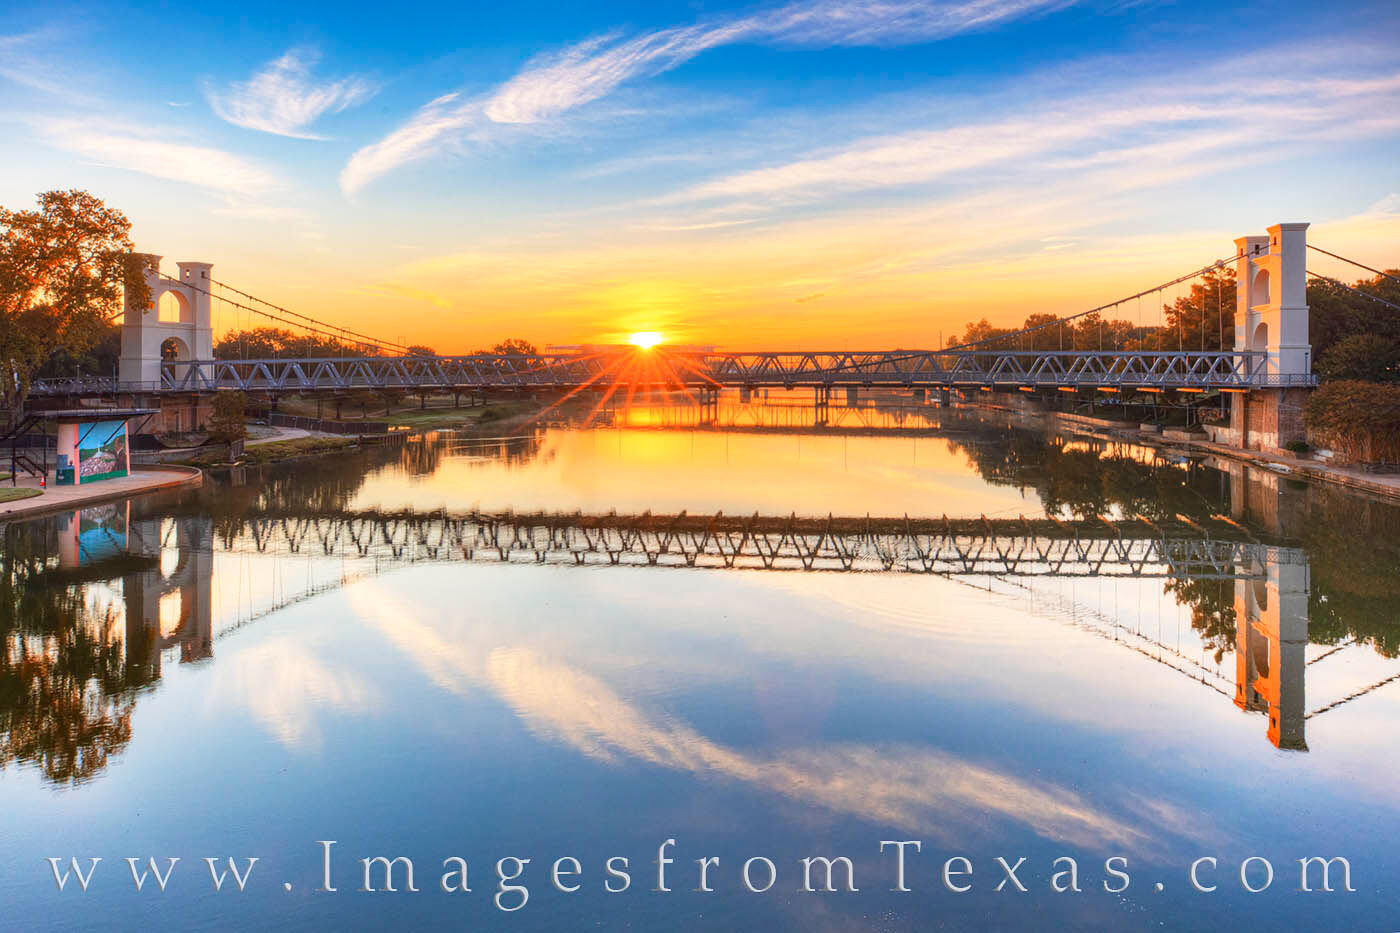 From the Washington Avenue Bridge on the Brazos River, this view shows the famous Waco Suspension Bridge at sunrise. In the distance...